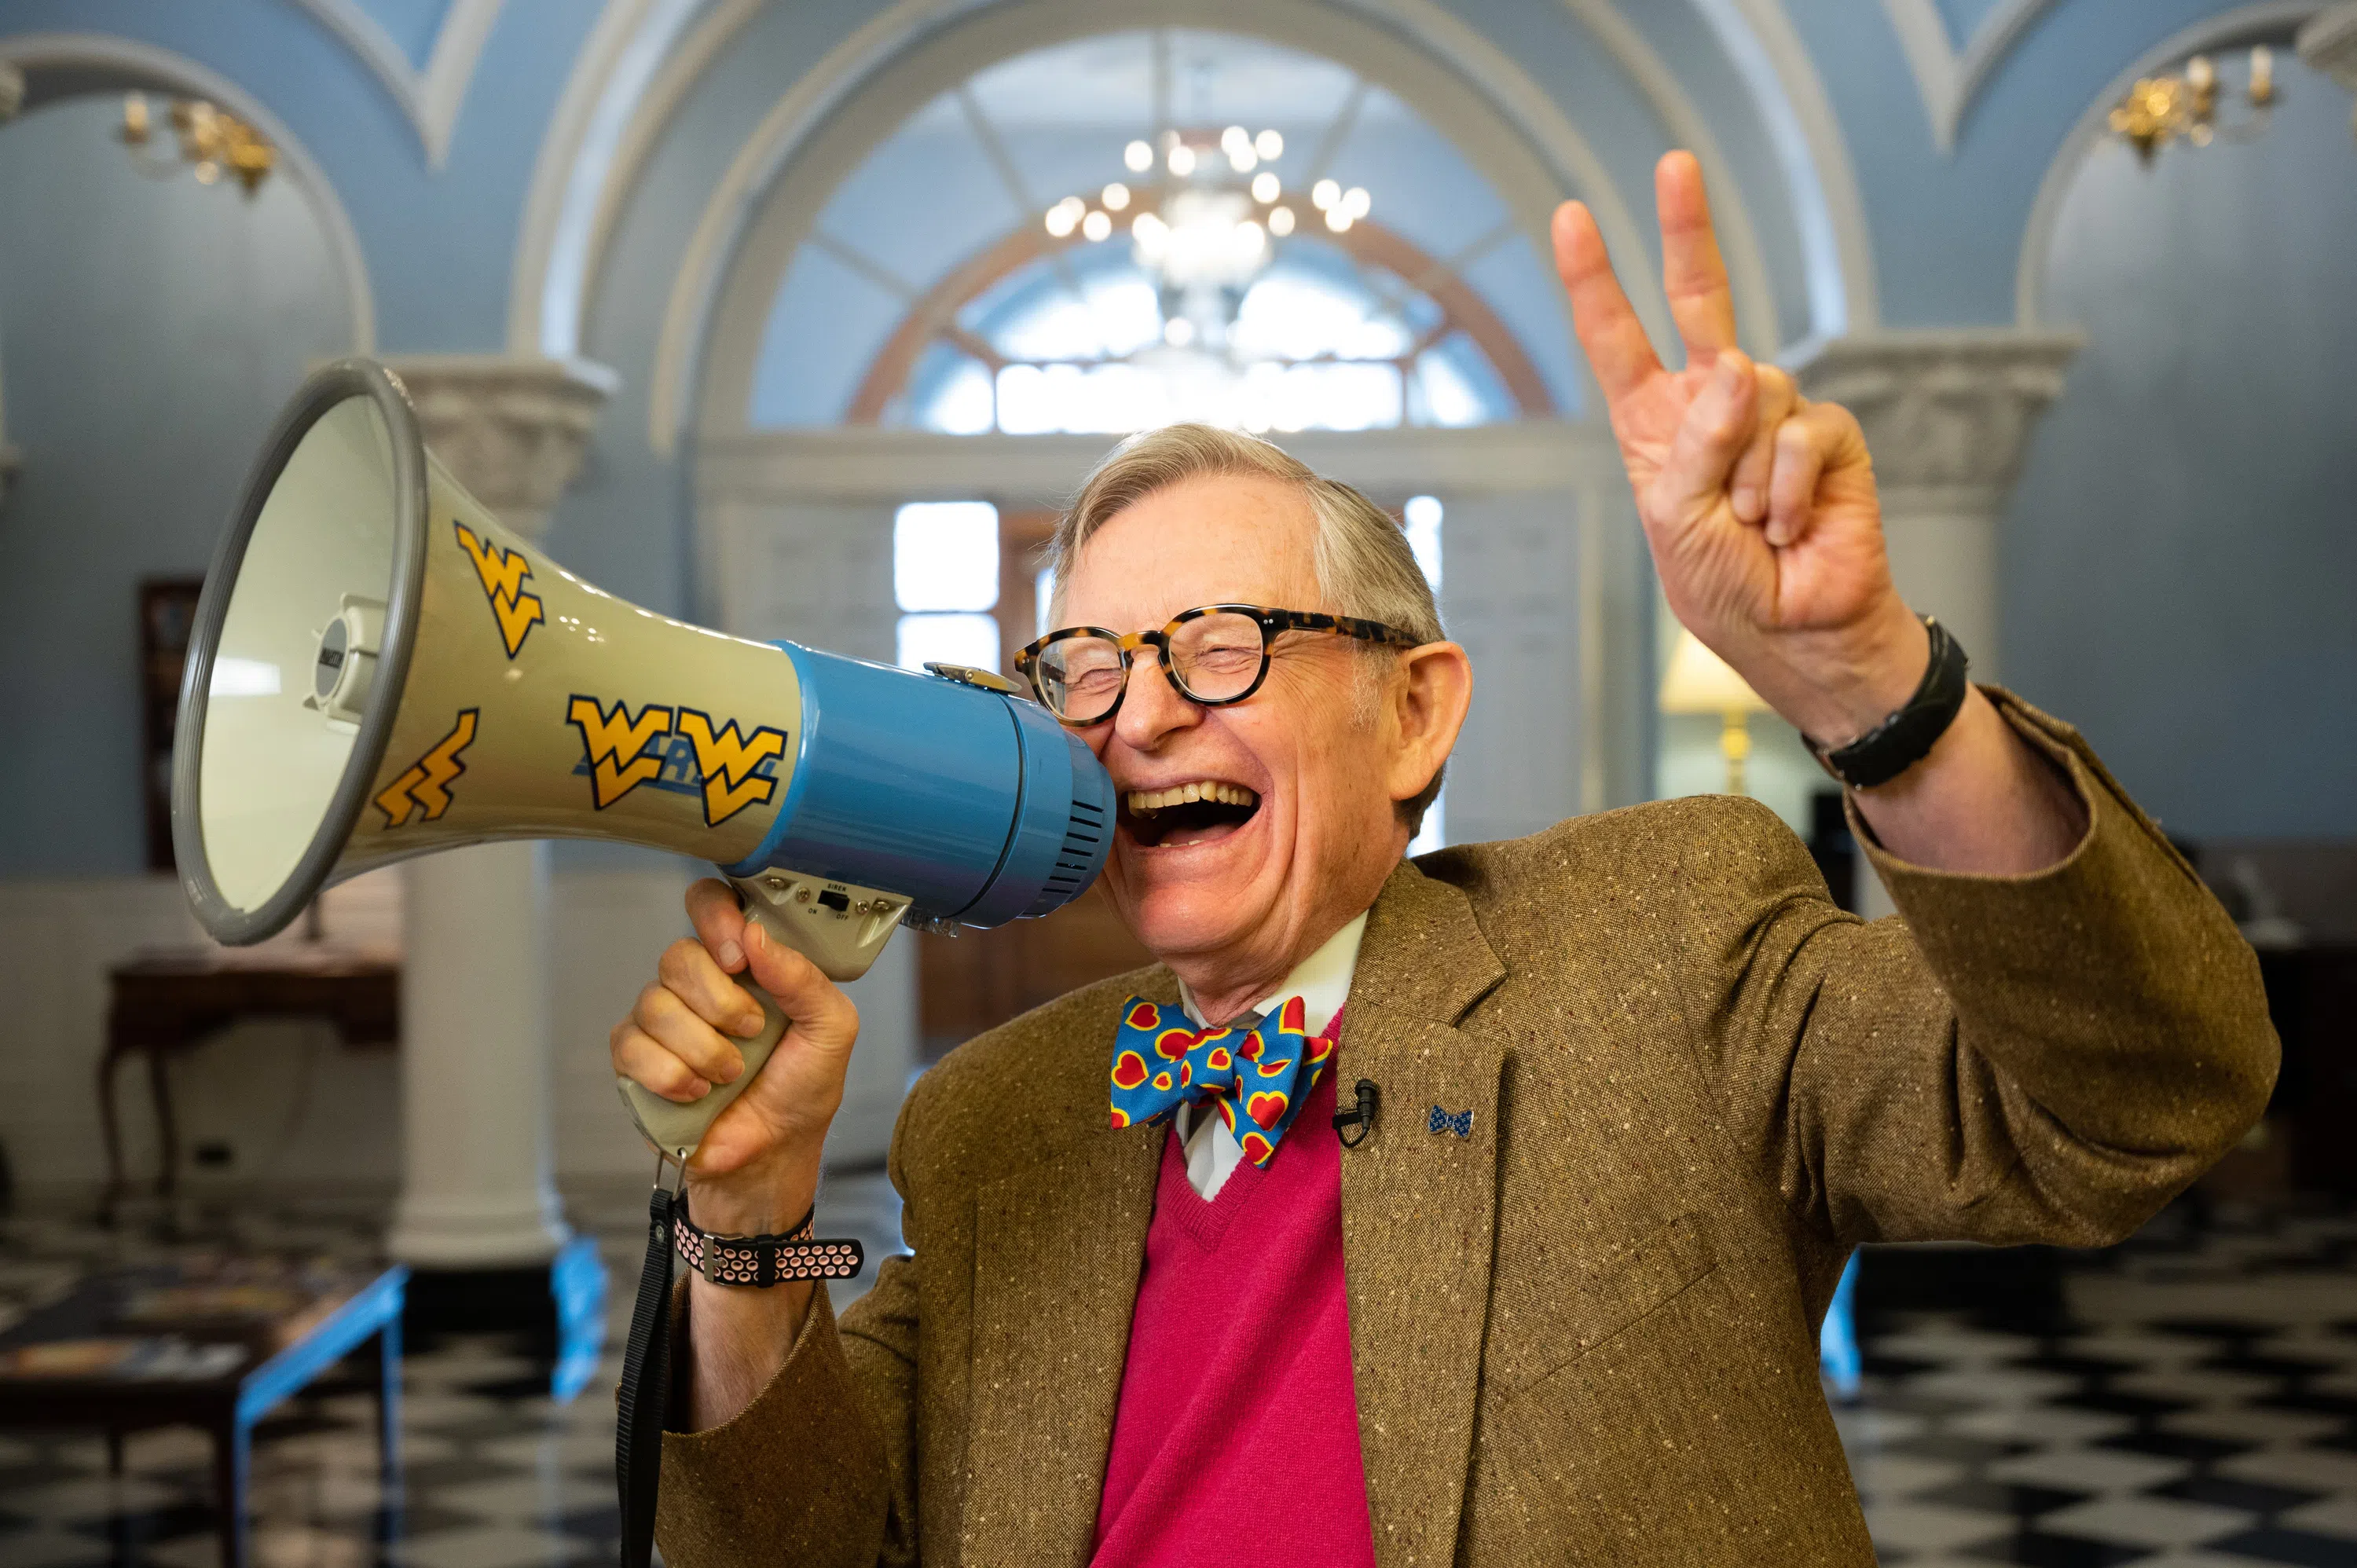 Dr. E. Gordon Gee poses with a megaphone and holds up a peace sign.